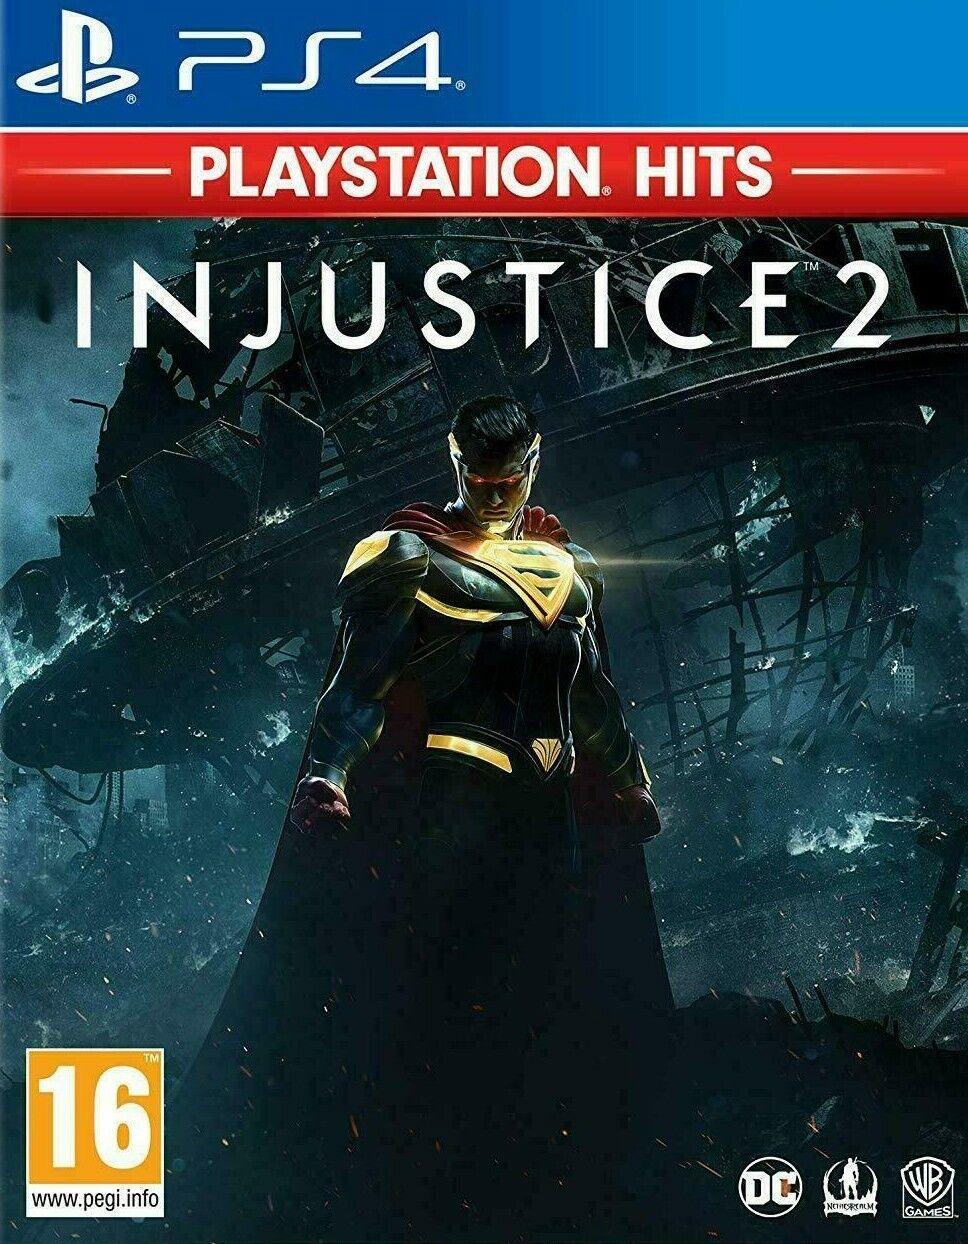 Injustice 2 / PS4 /Playstation 4 - GD Games 